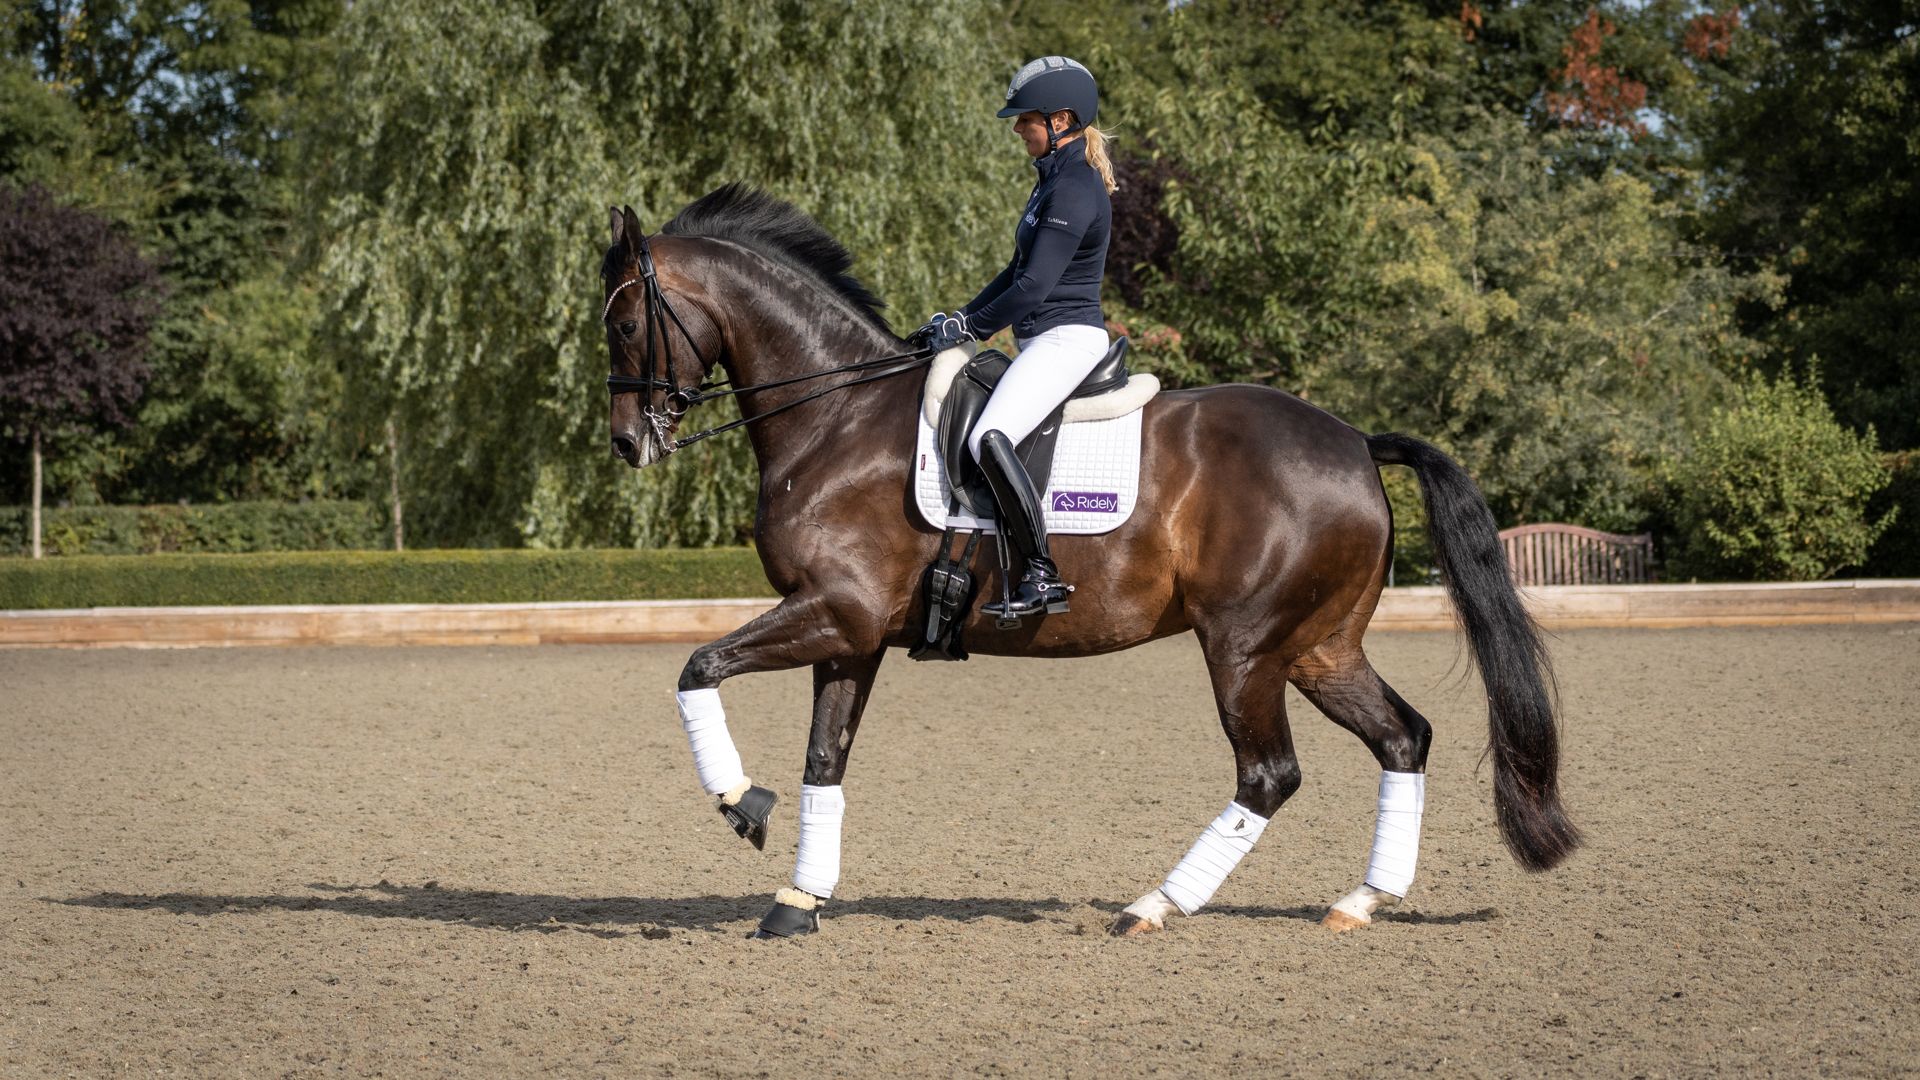 Dressage Horse Cantering